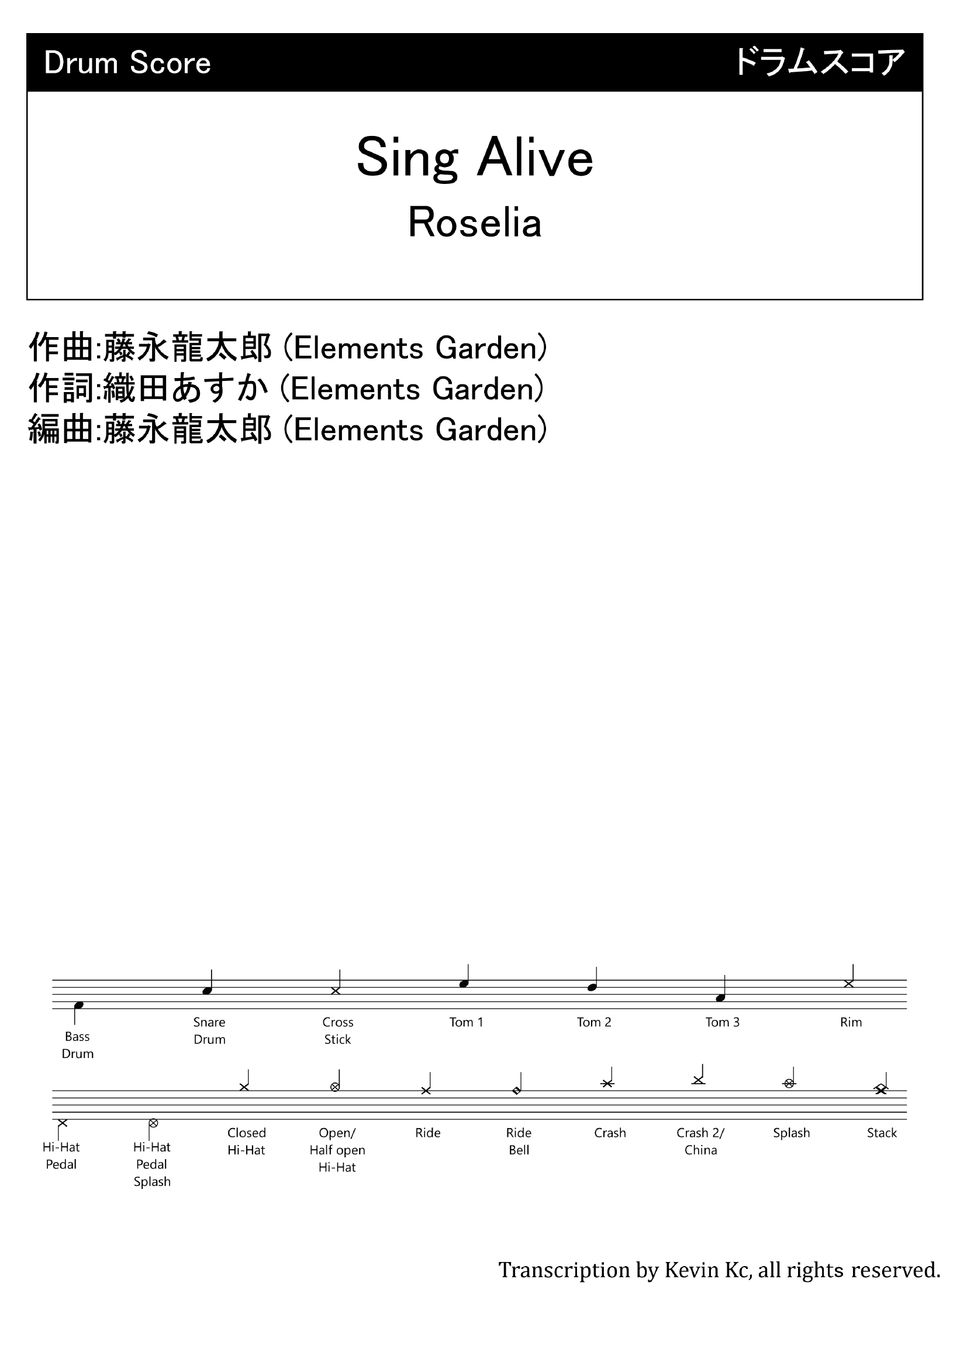 Roselia - Sing Alive by Kevin Kc